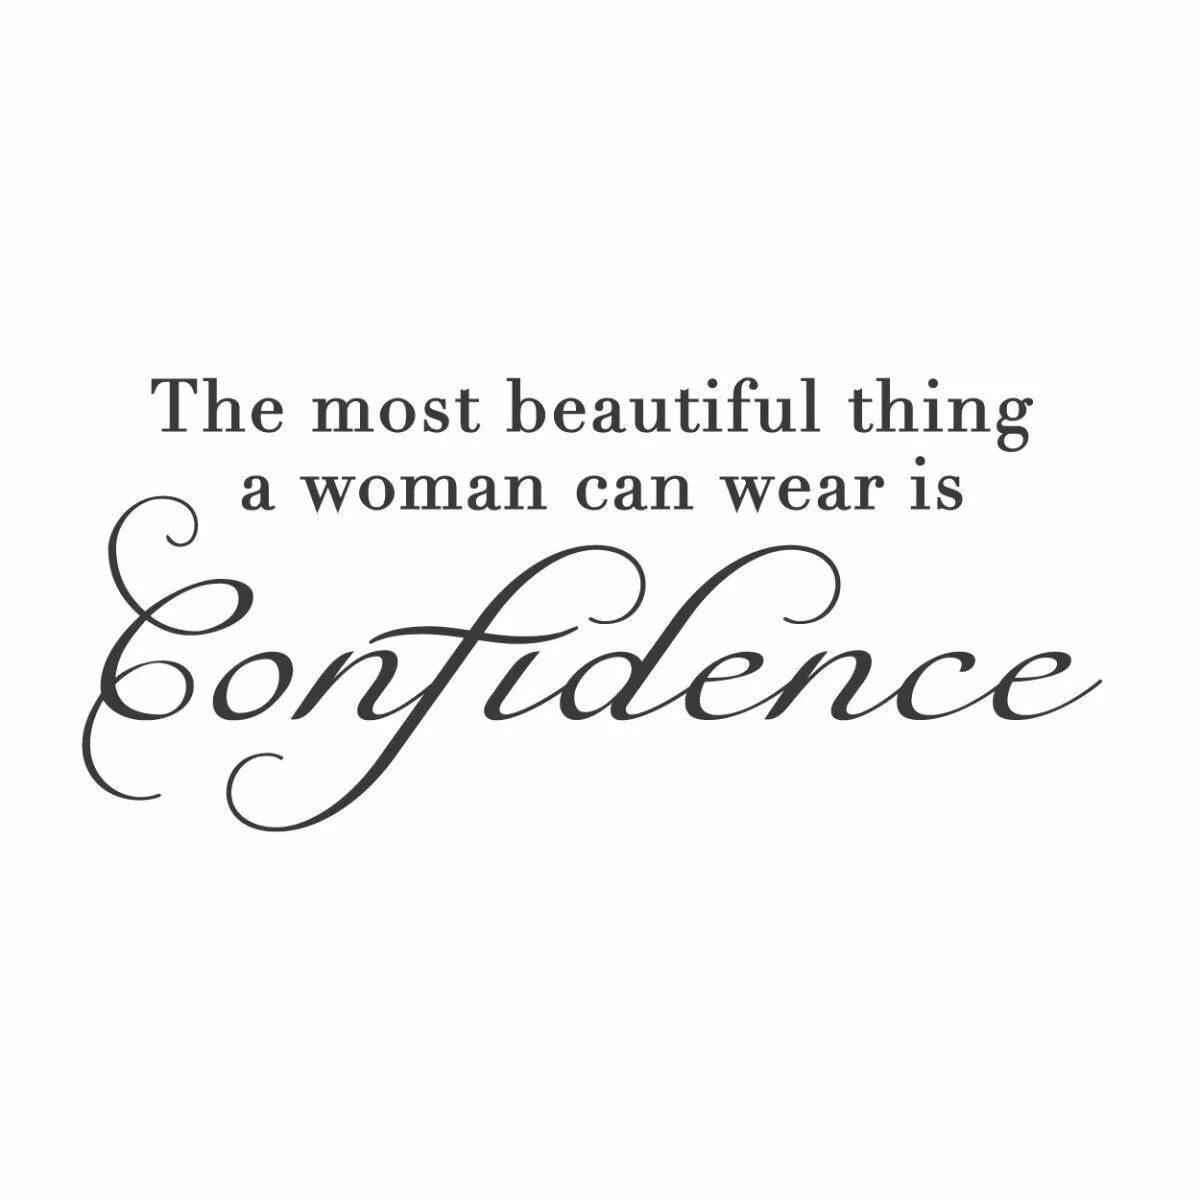 Beautiful things минус. Woman quotes. Картинки do beautiful things. The most popular quotes. Independent woman.